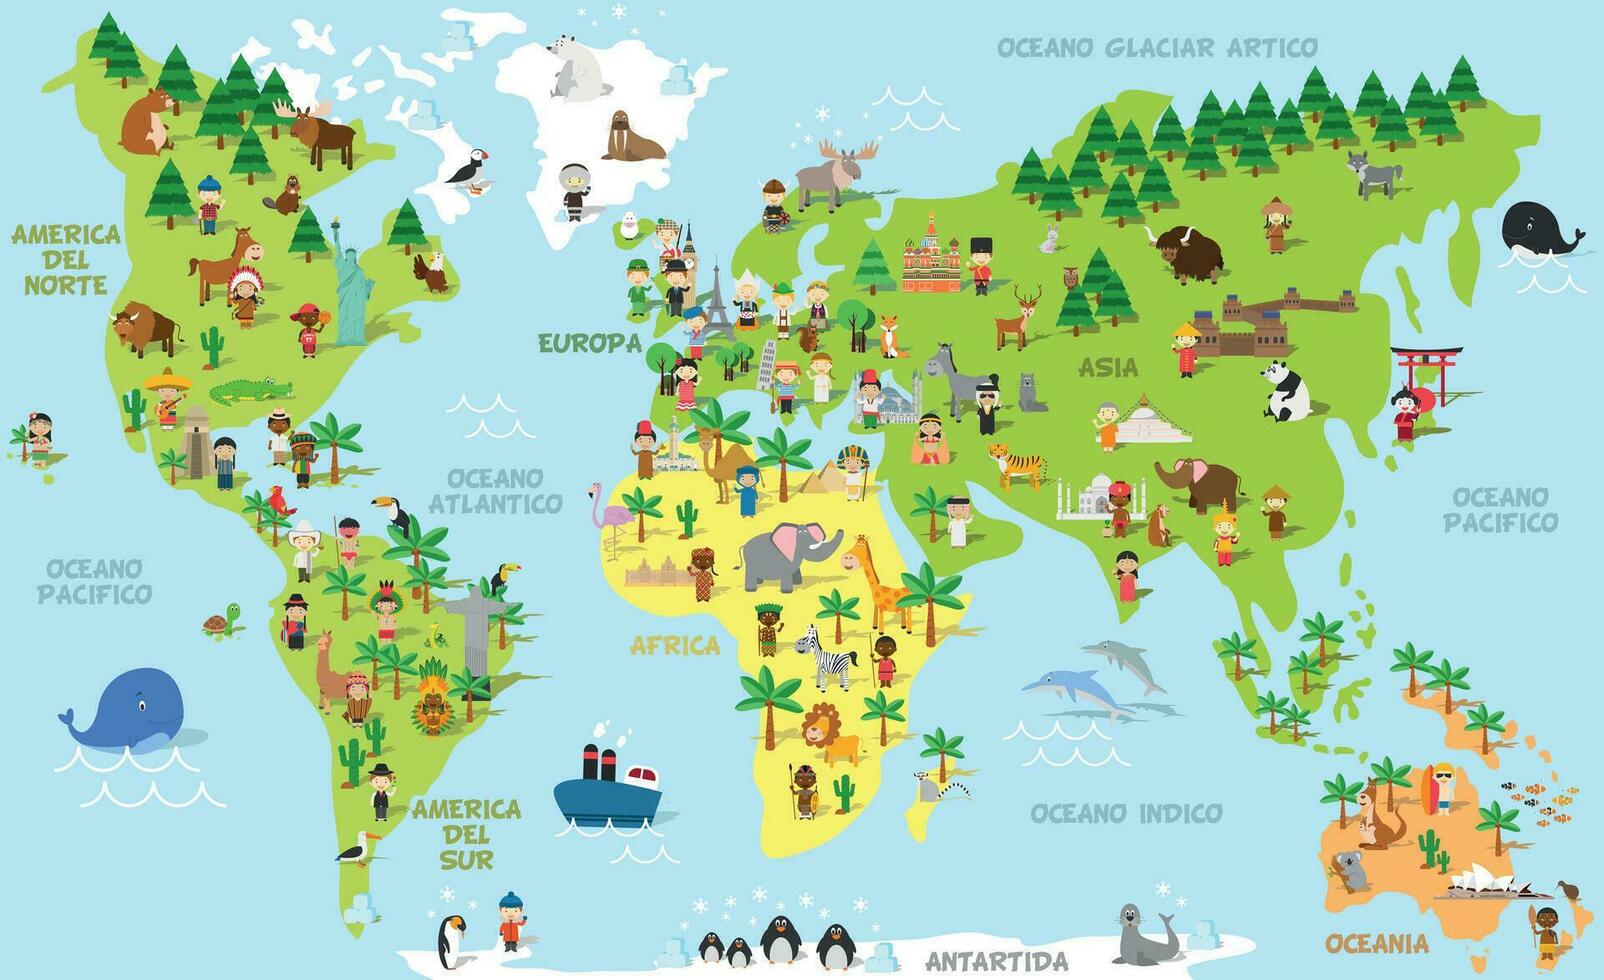 Funny cartoon world map with childrens of different nationalities, animals and monuments of all the continents and oceans. Names in spanish. Vector illustration for preschool education and kids design